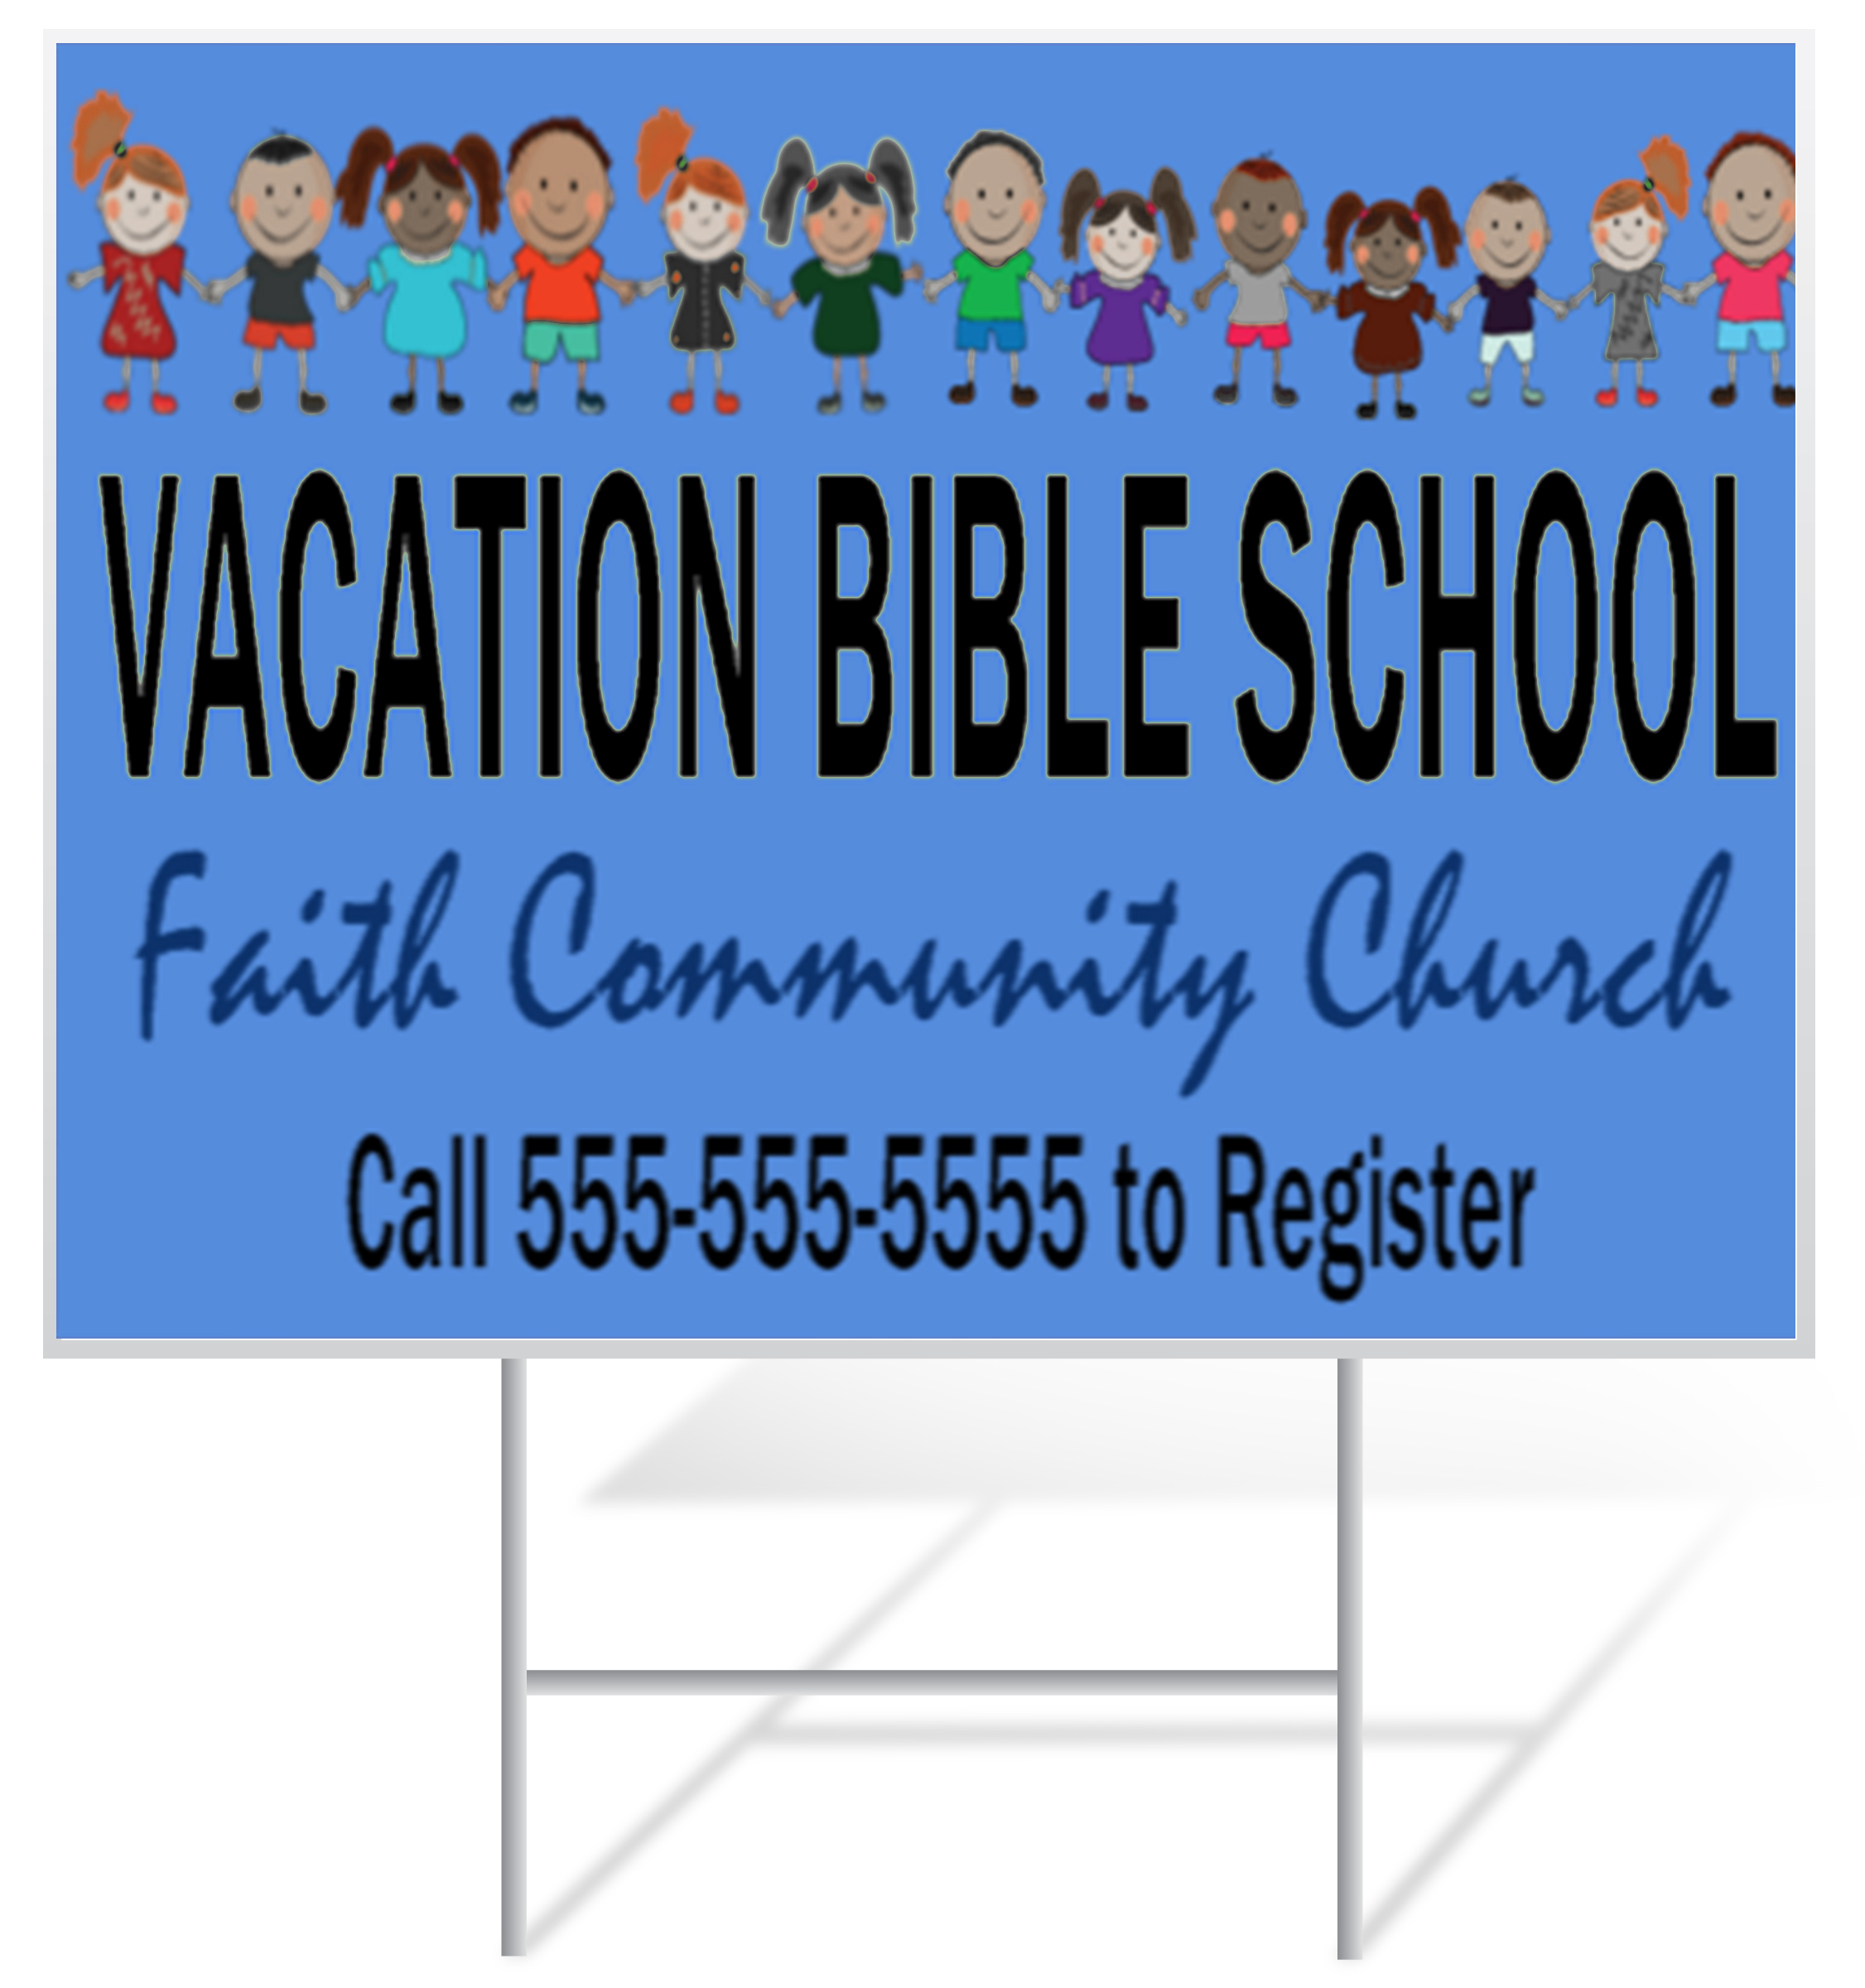 Vacation Bible School Lawn Sign Example | LawnSigns.com